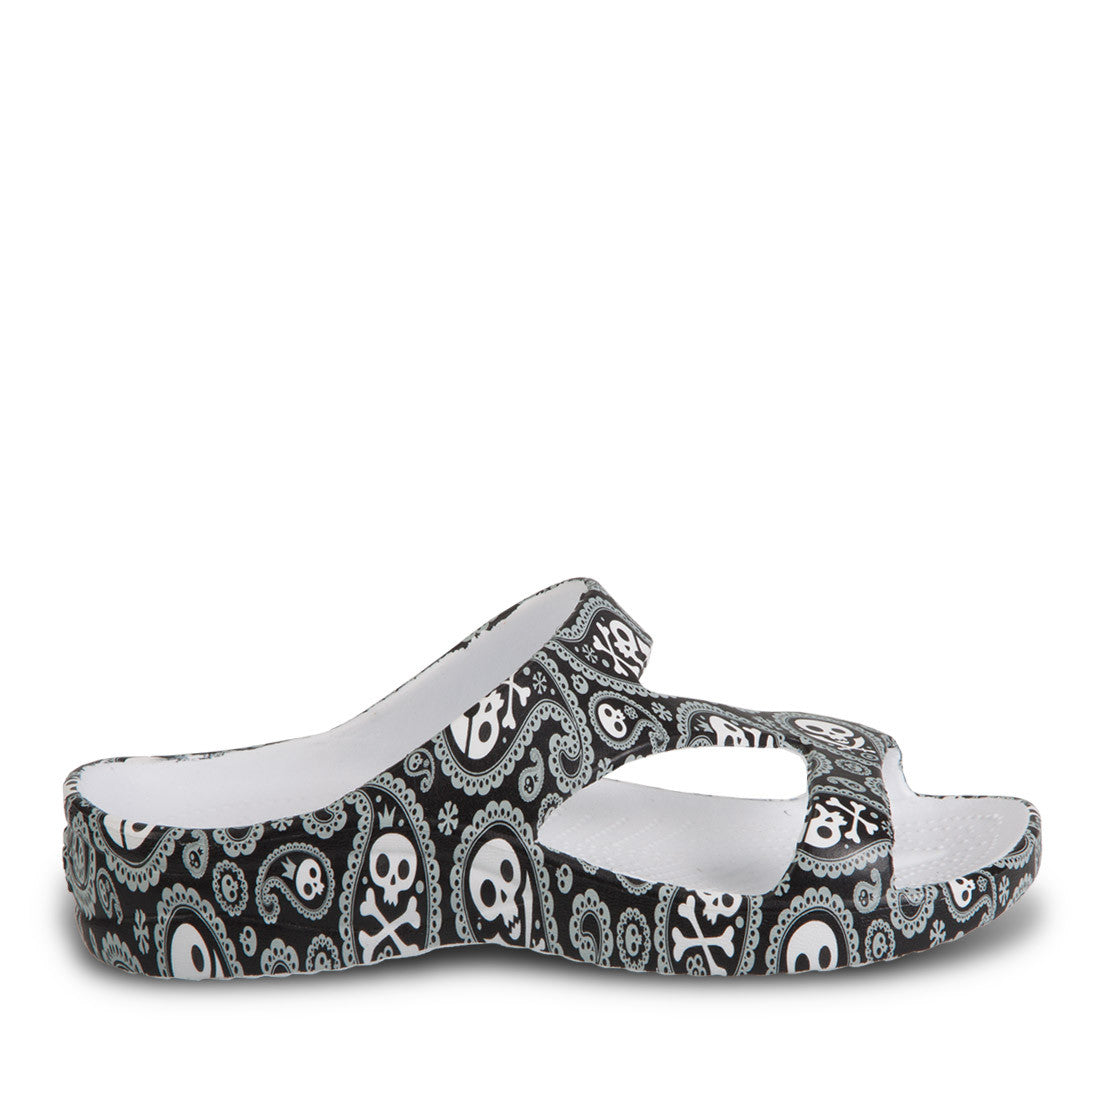 Image of Women's Loudmouth Z Sandals - Shiver Me Timbers